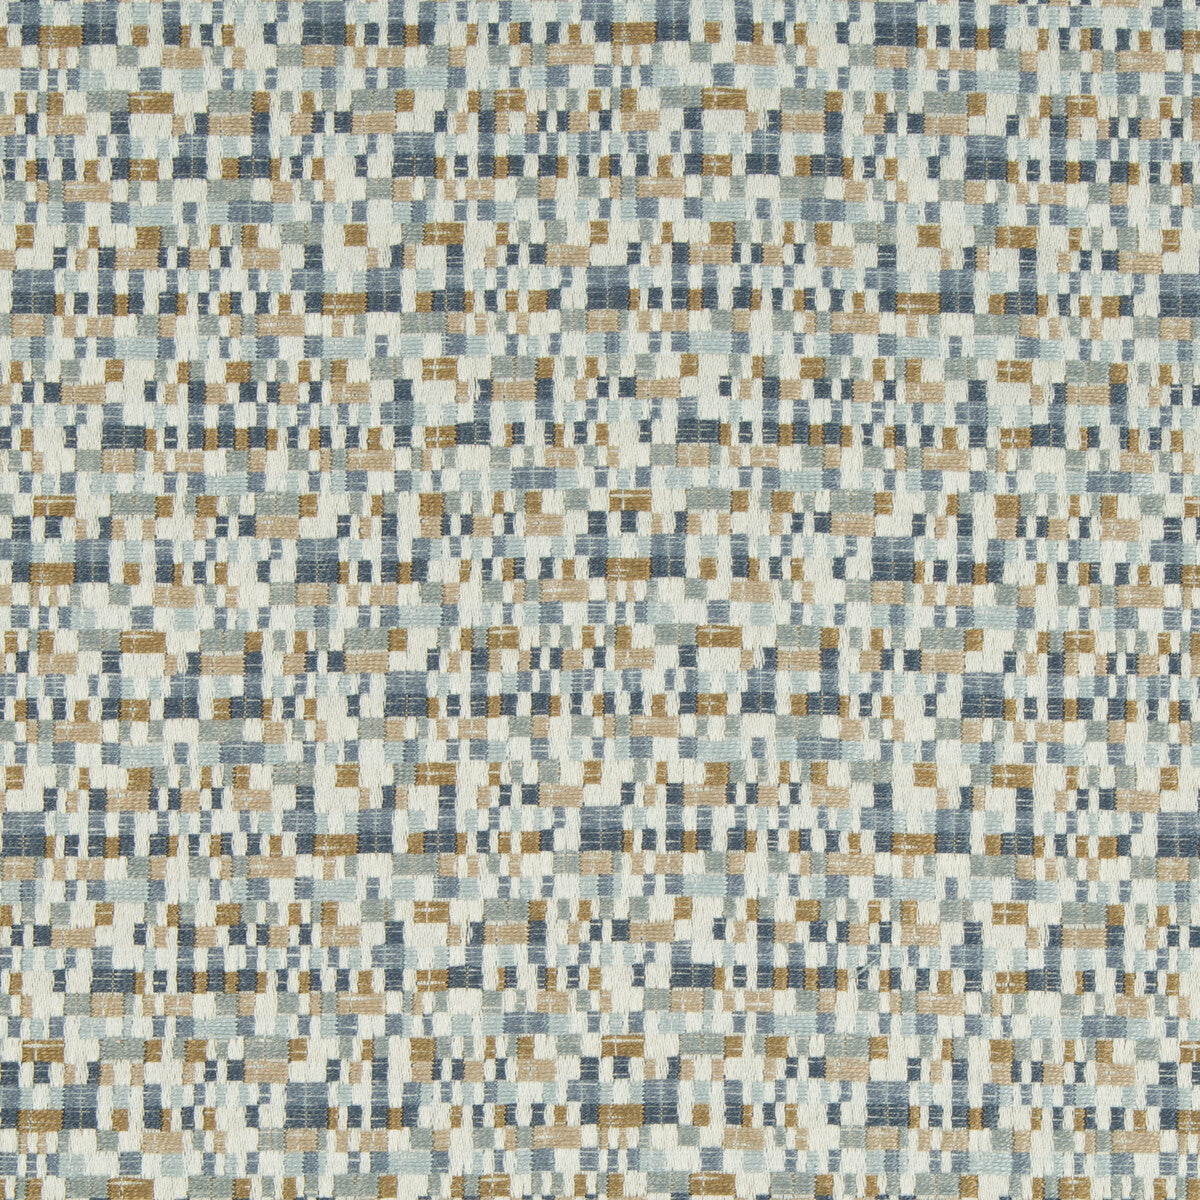 Kravet Design fabric in 34697-521 color - pattern 34697.521.0 - by Kravet Design in the Crypton Home collection